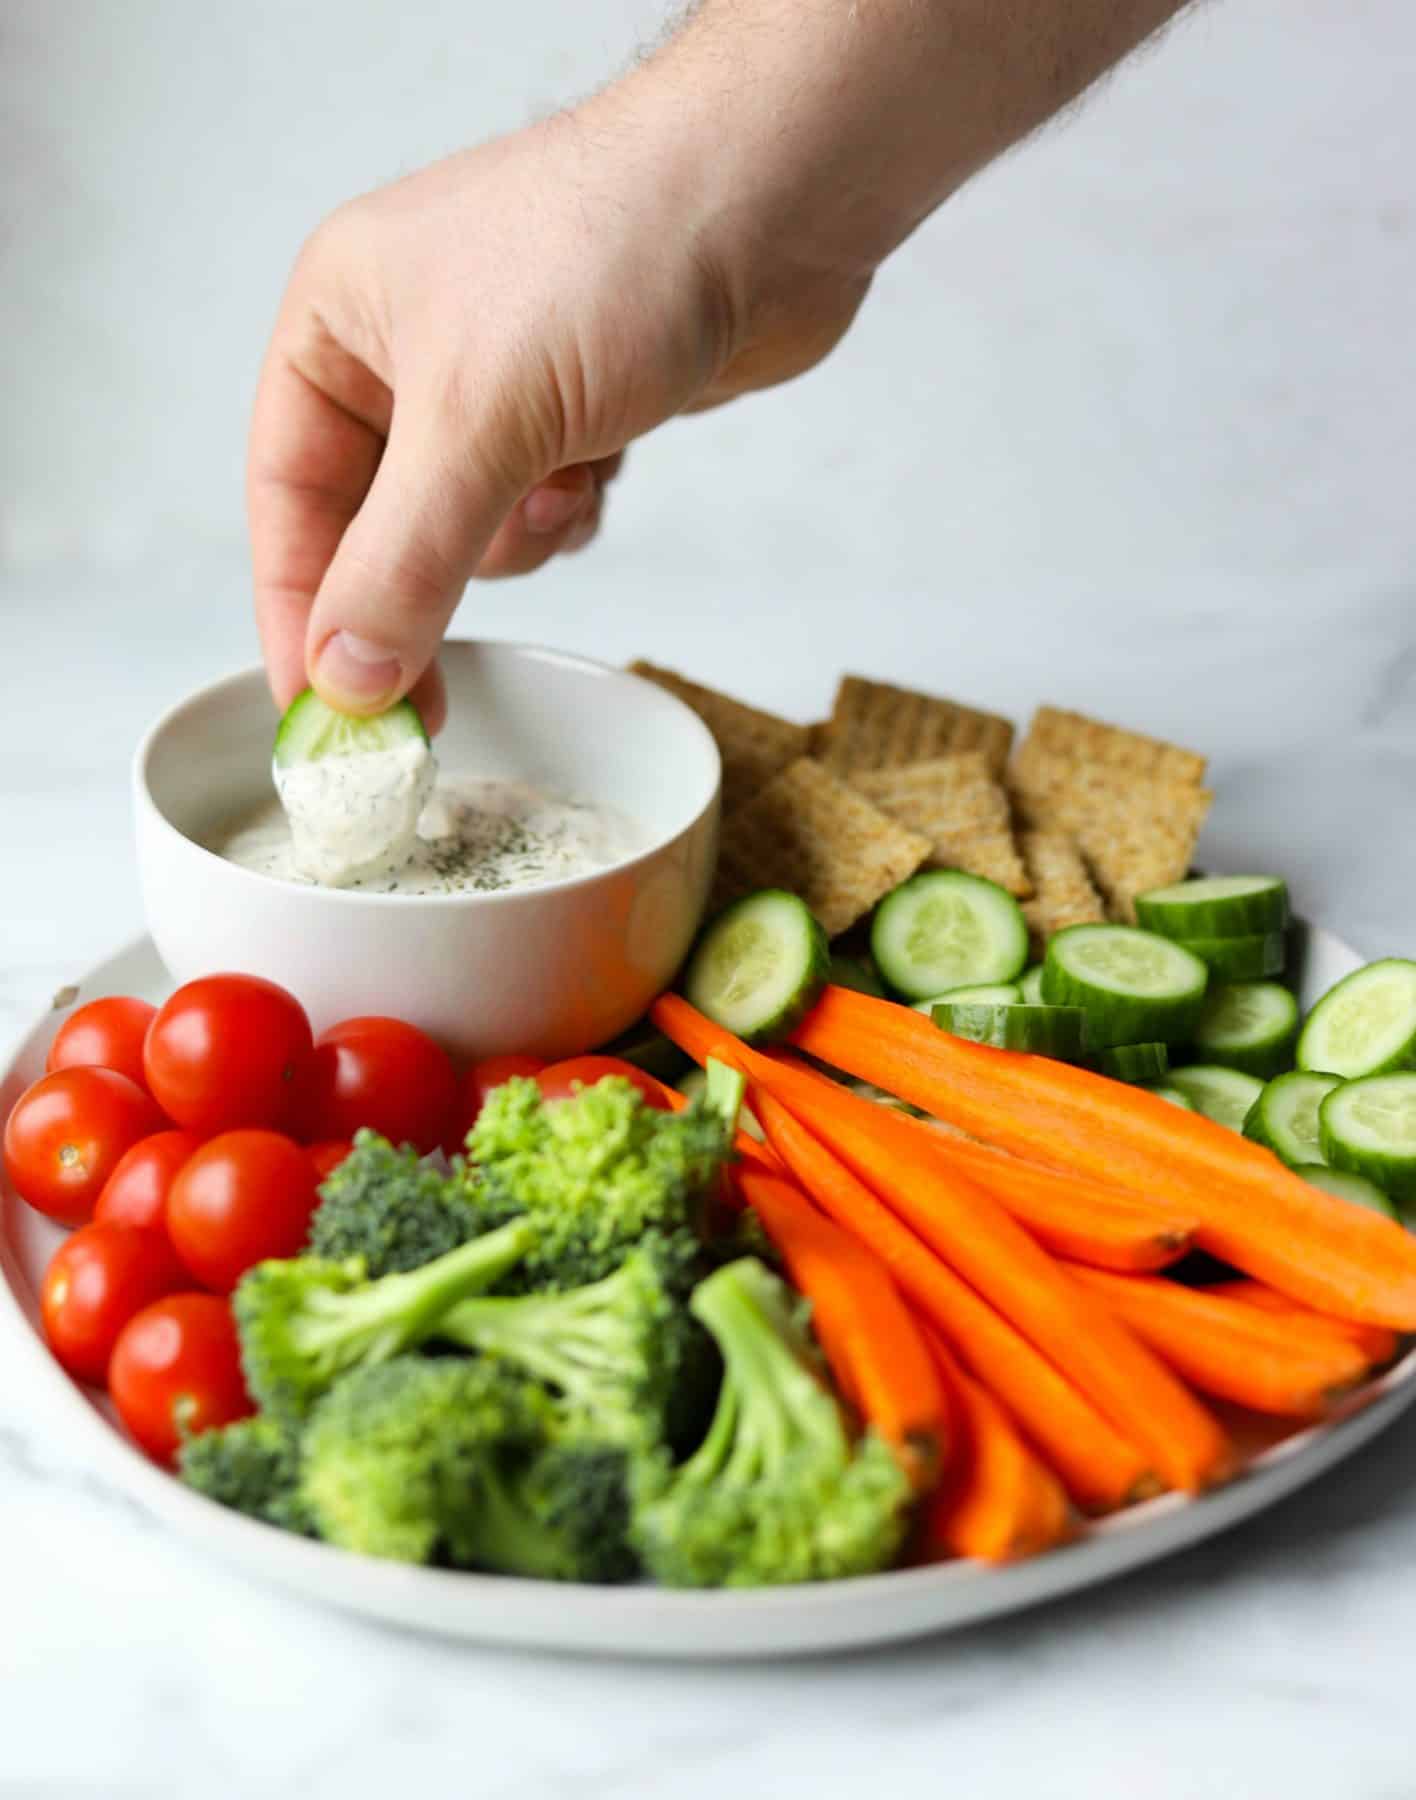 Veggie tray with hand dipping cucumber